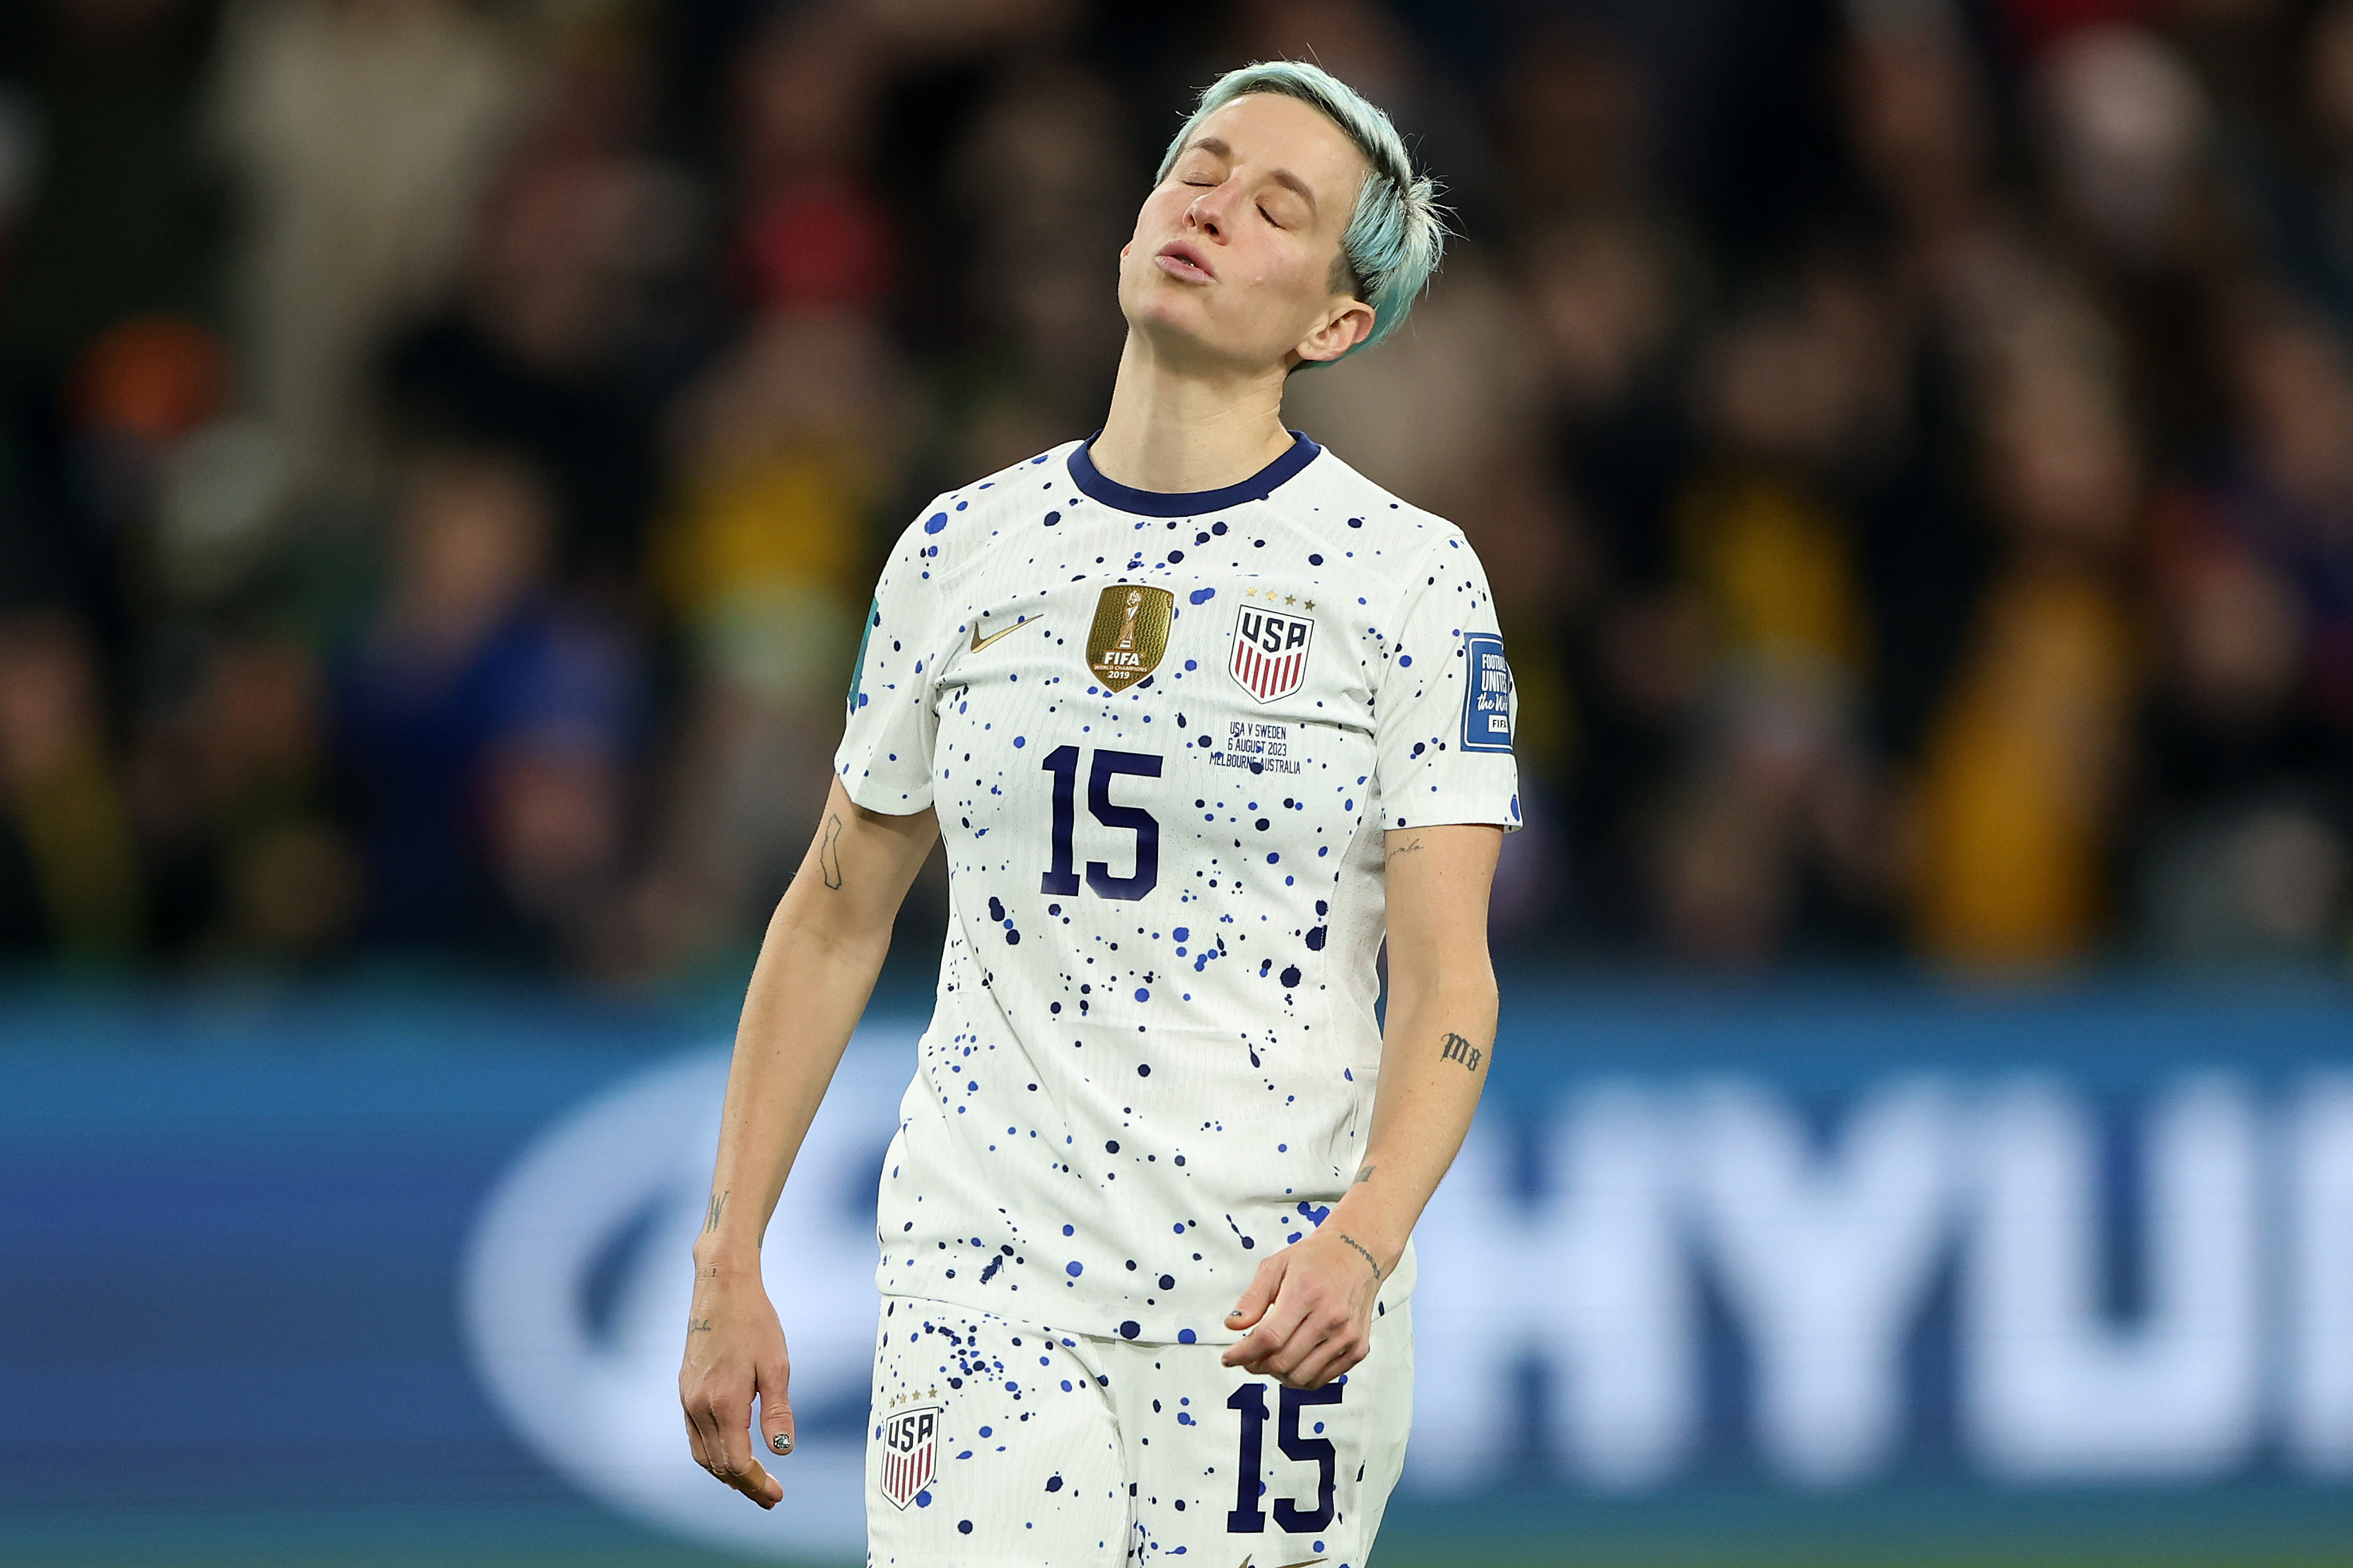 Sweden knocks US out of Women's World Cup on penalty kicks